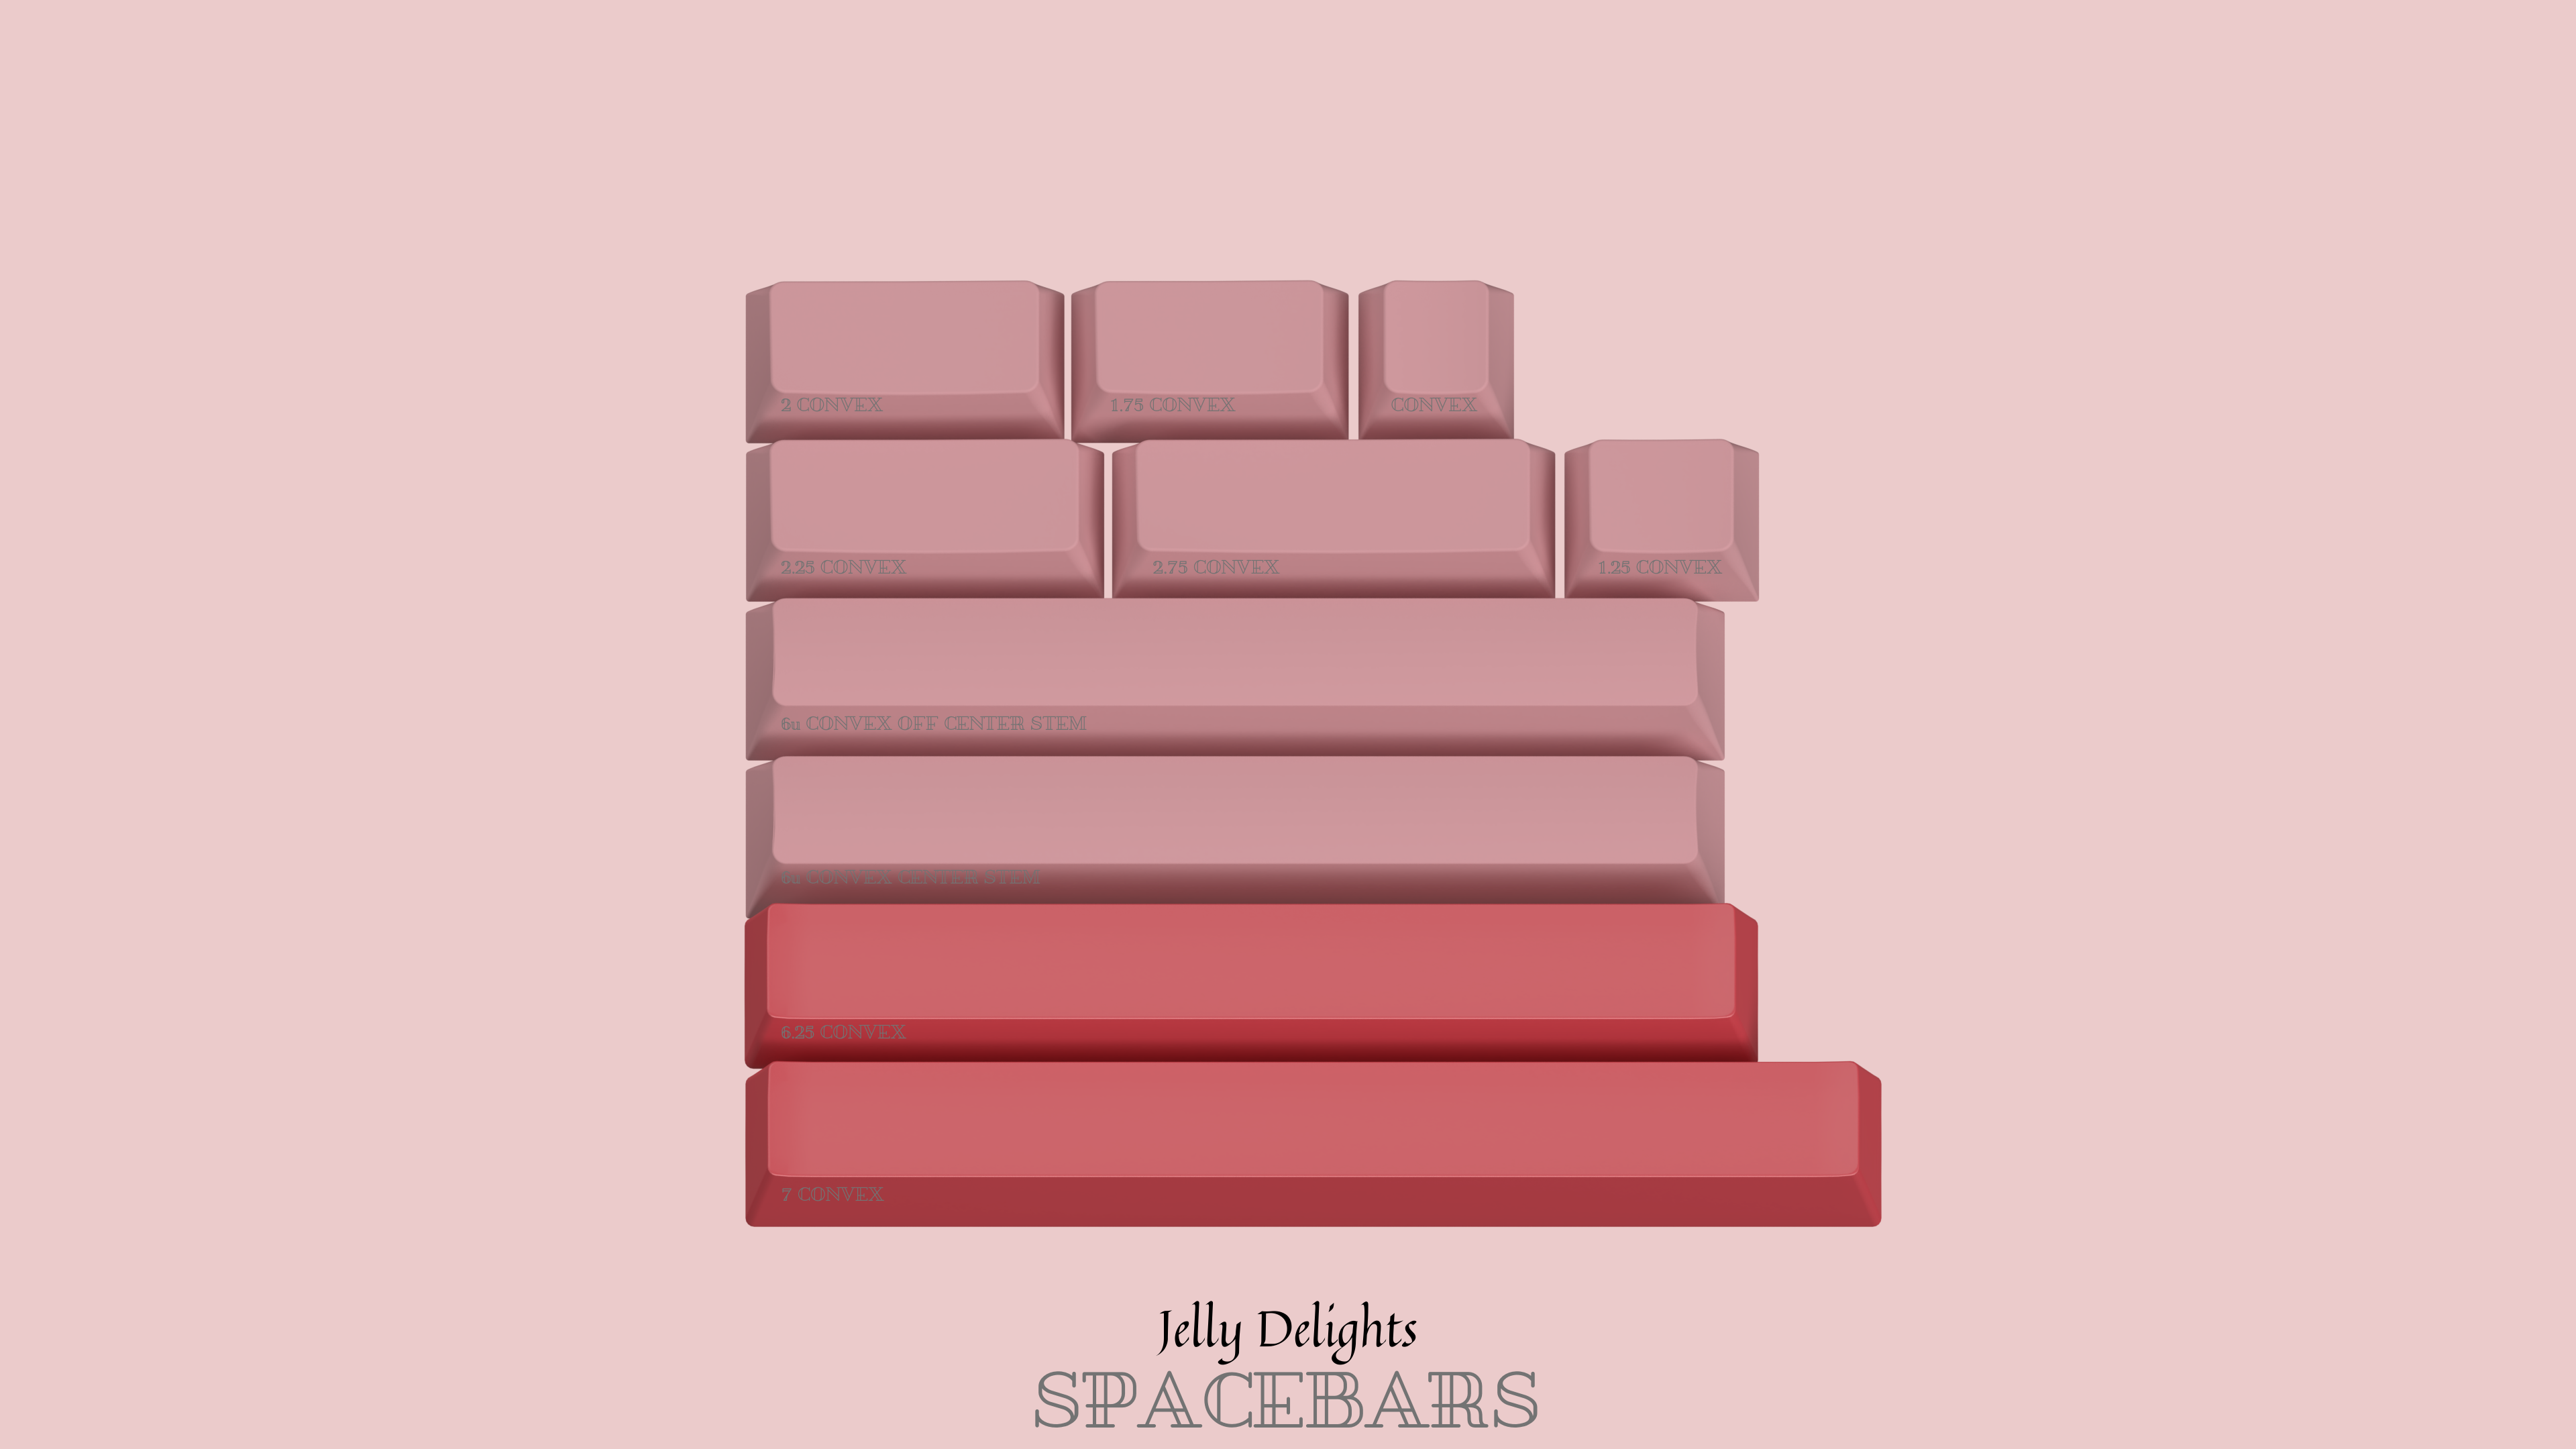 GMK Jelly Delights